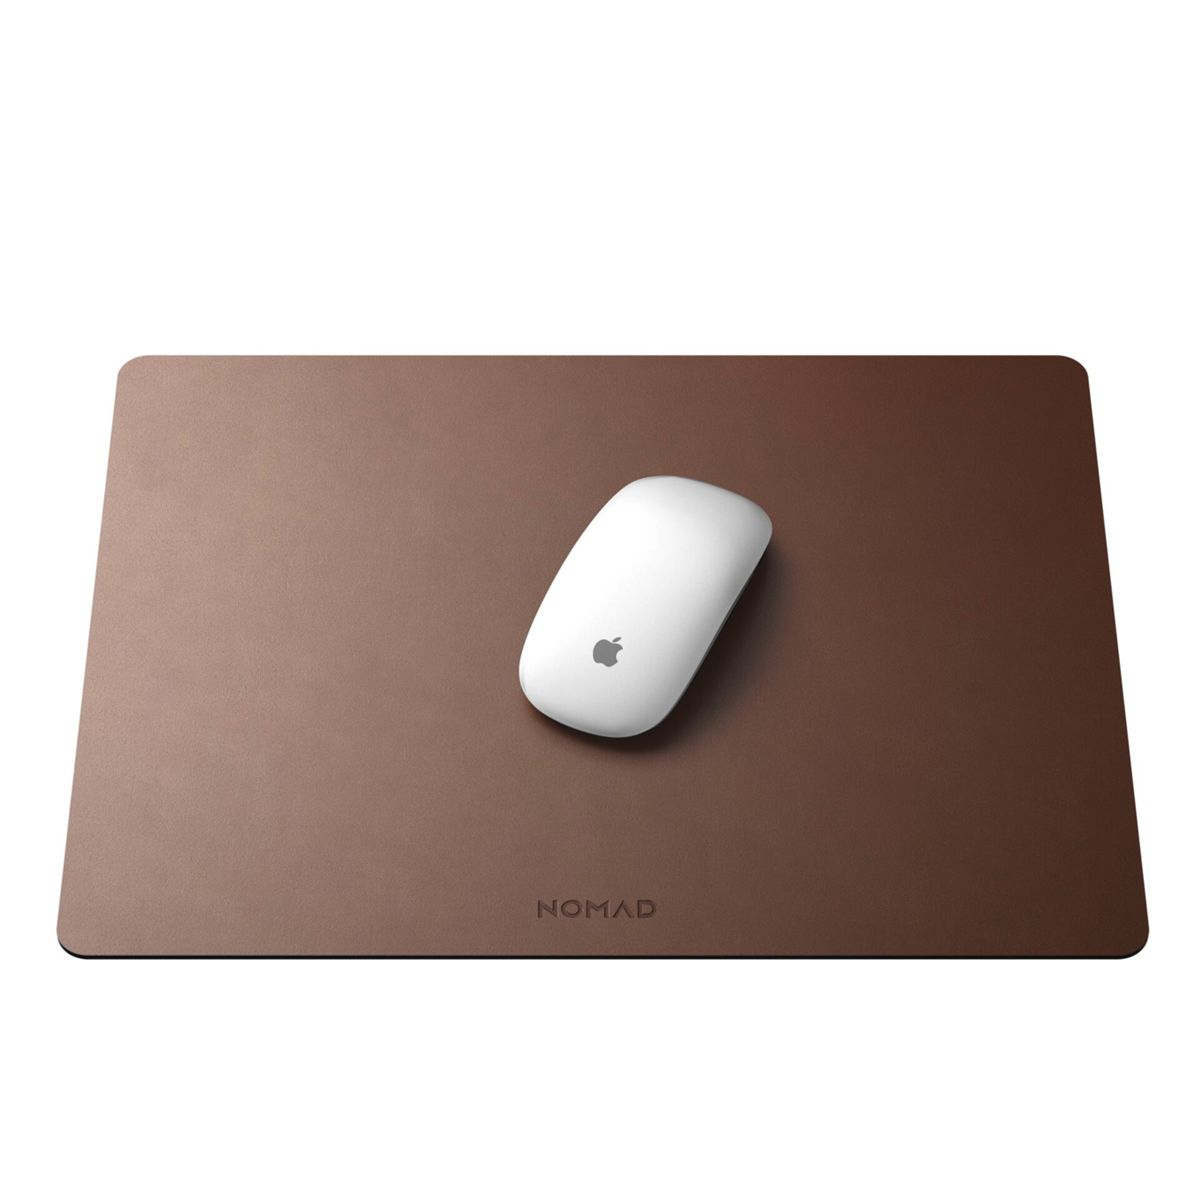 NOMAD Rustic 16-Inch, Brown Mousepad Leather Mauspad